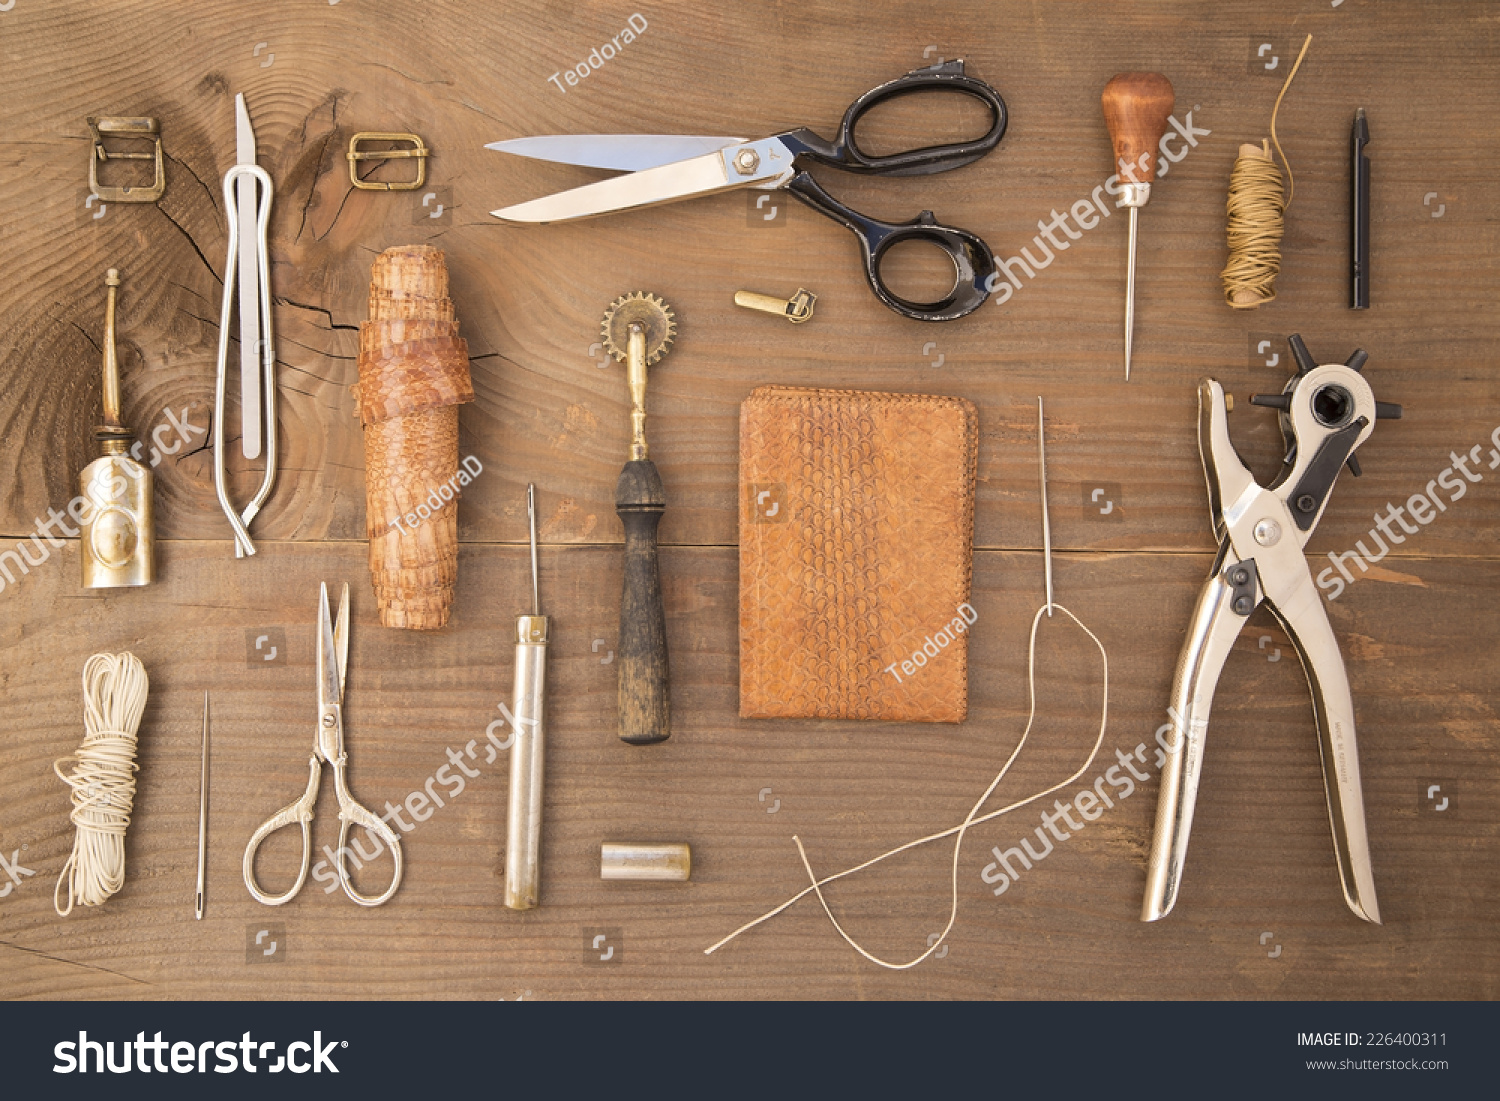 Leather craft tools on a wooden background #226400311